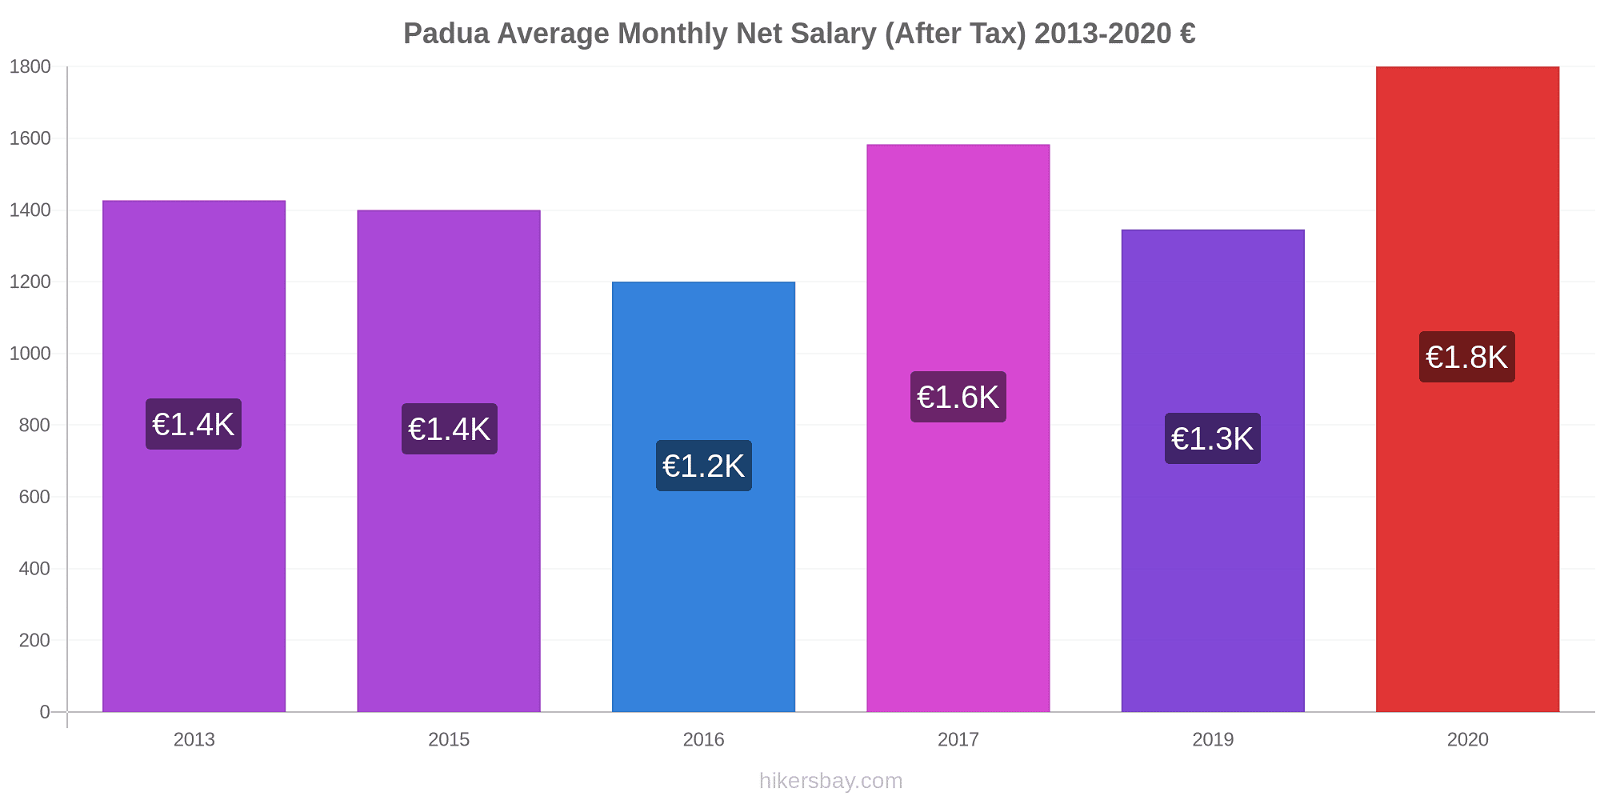 Padua price changes Average Monthly Net Salary (After Tax) hikersbay.com